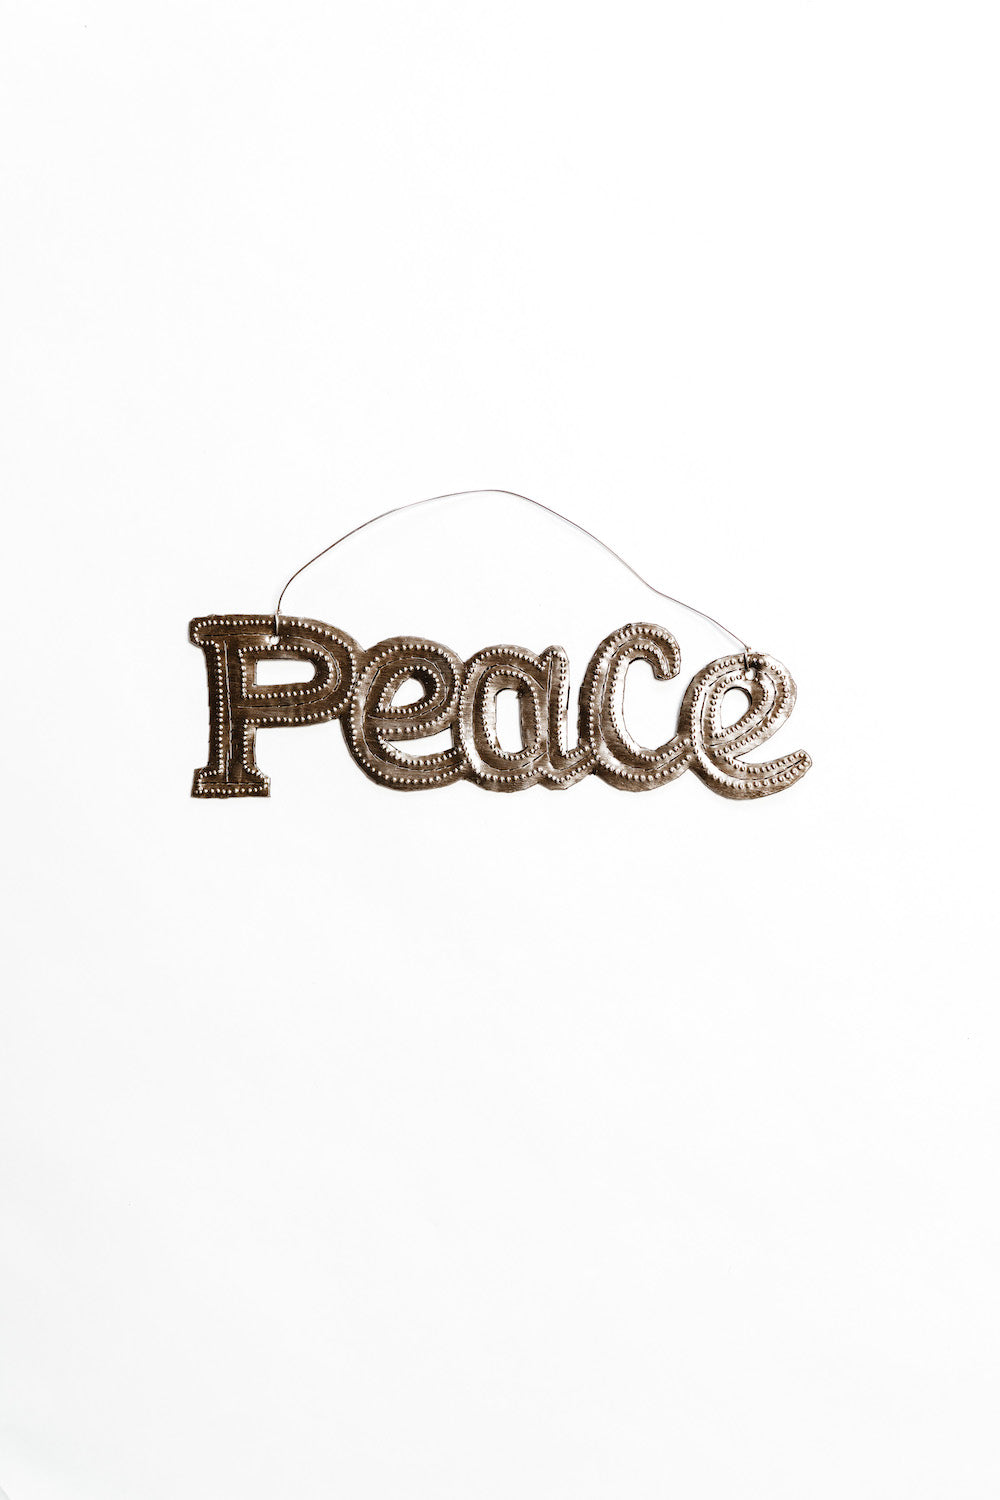 Recycled Steel Peace Ornament - Cultivate a sense of inner peace and harmony with this inspiring word art.